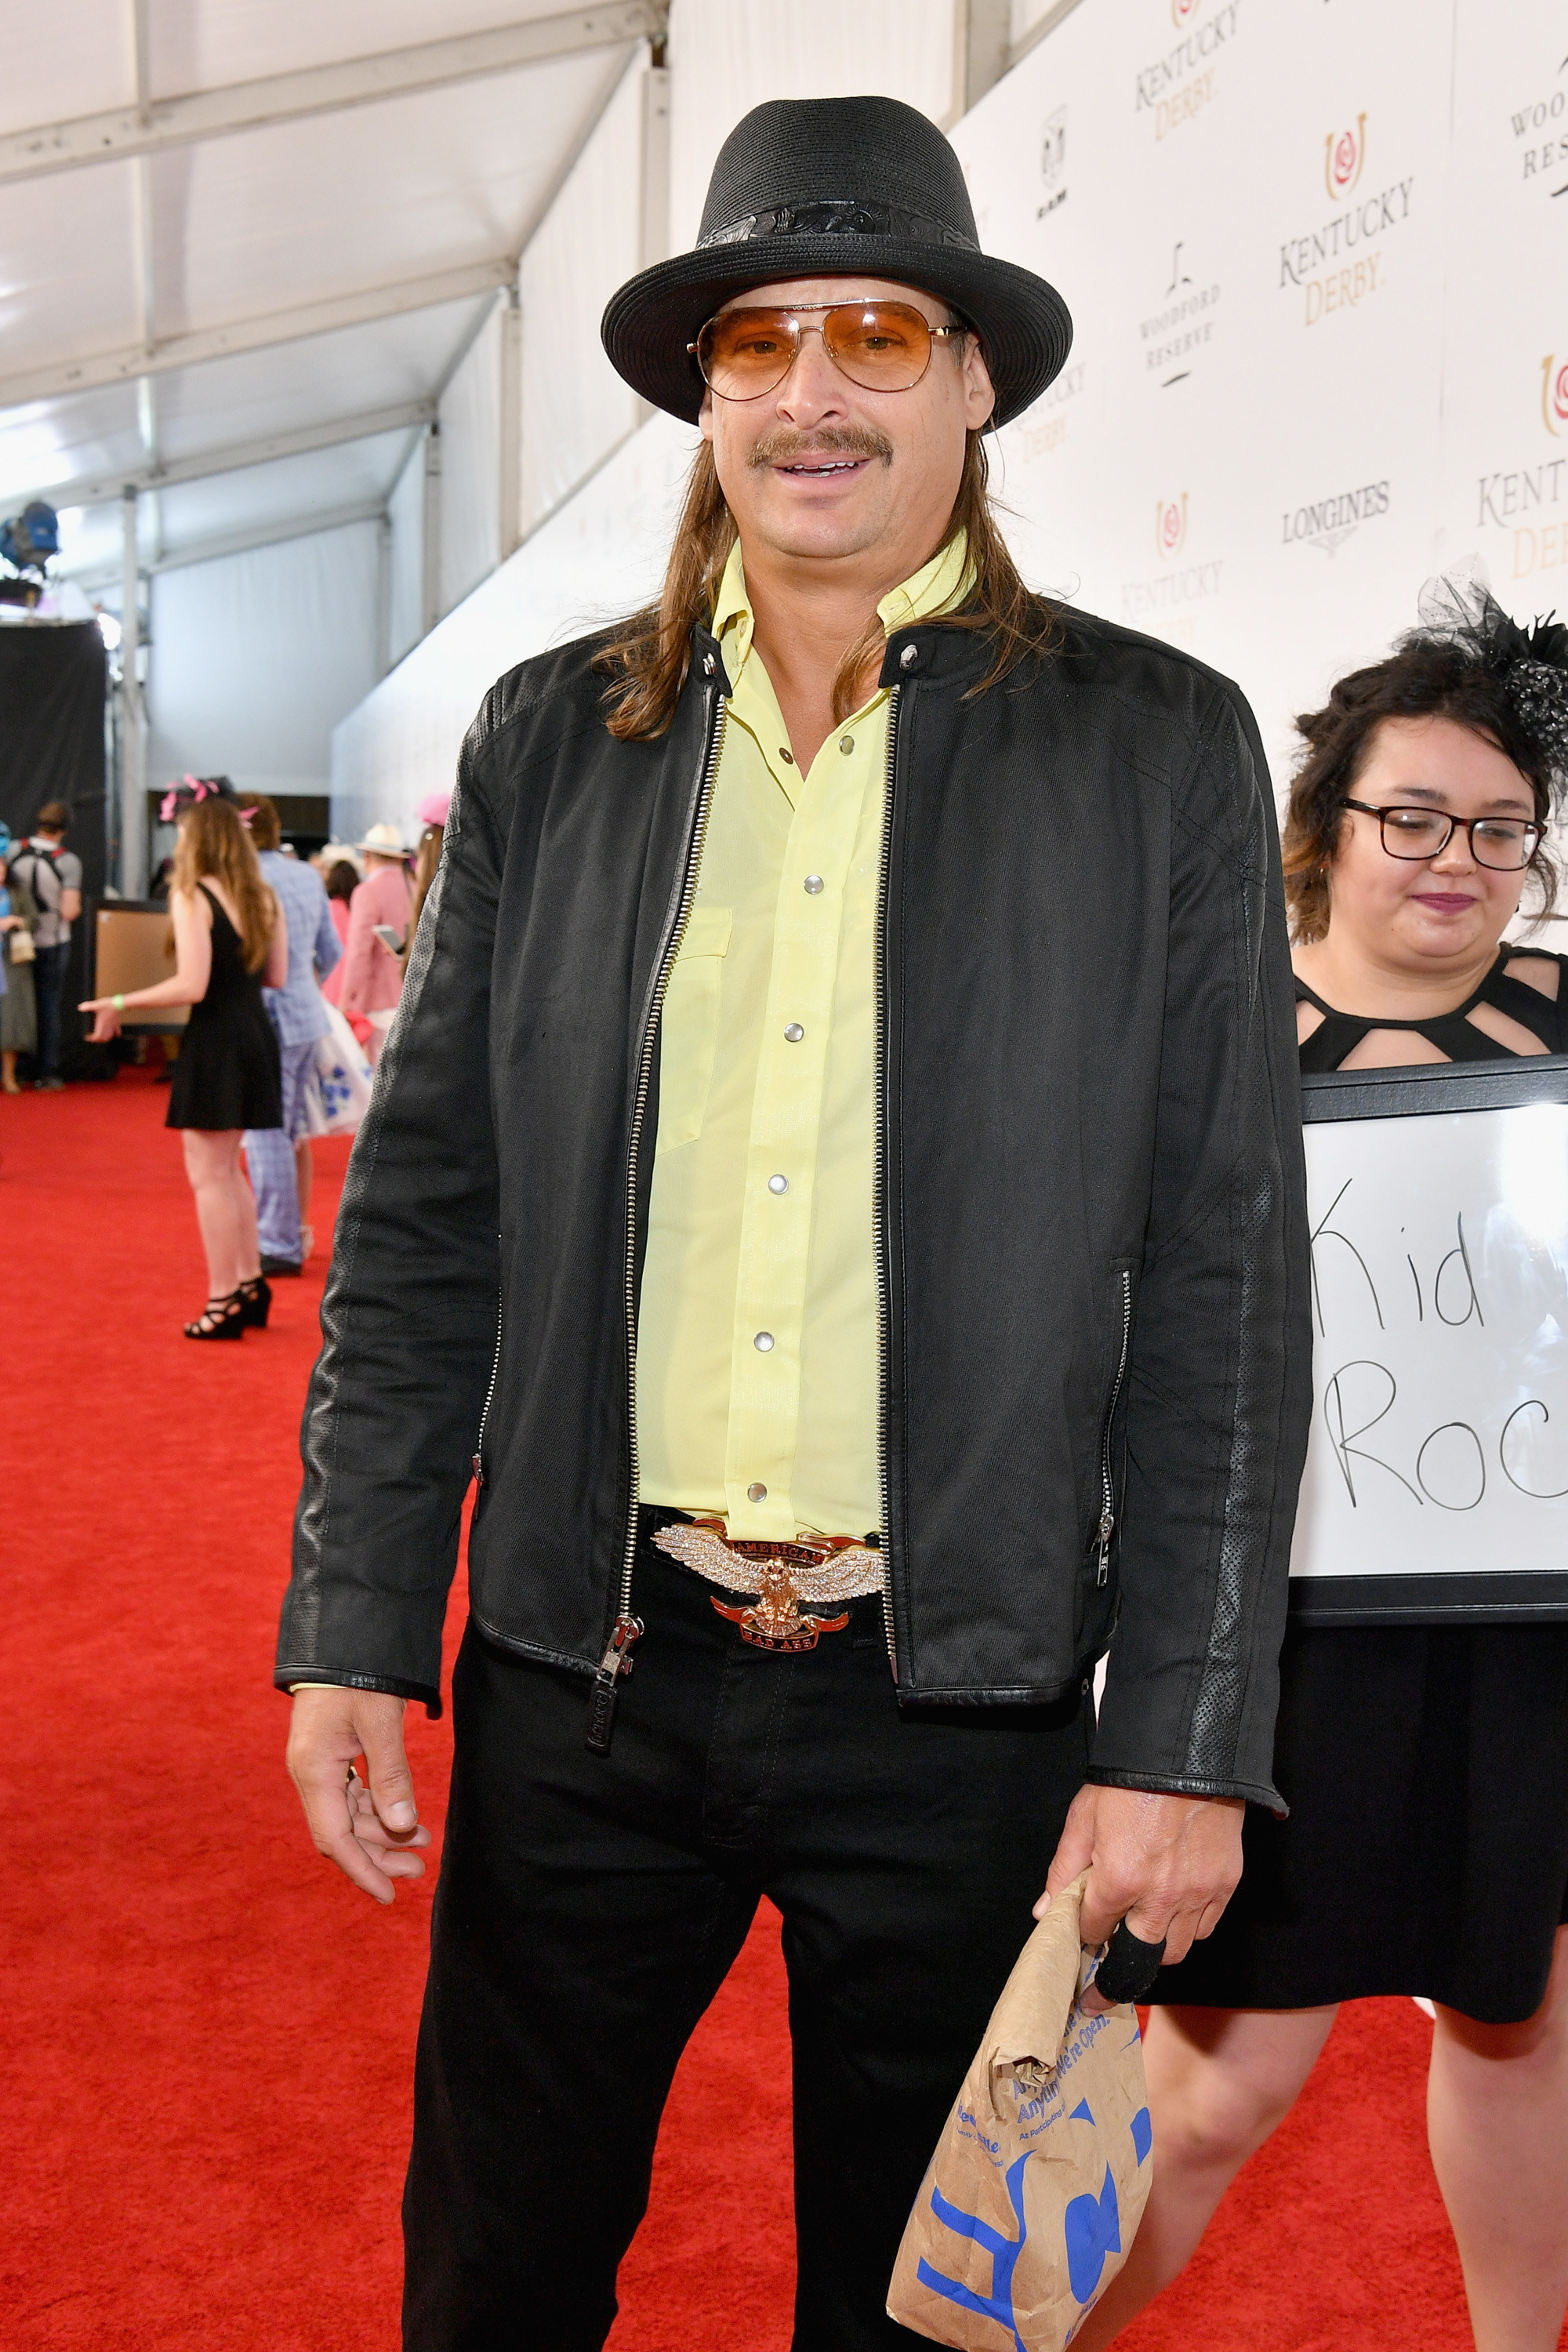 Kid Rock on the Kentucky Derby red carpet